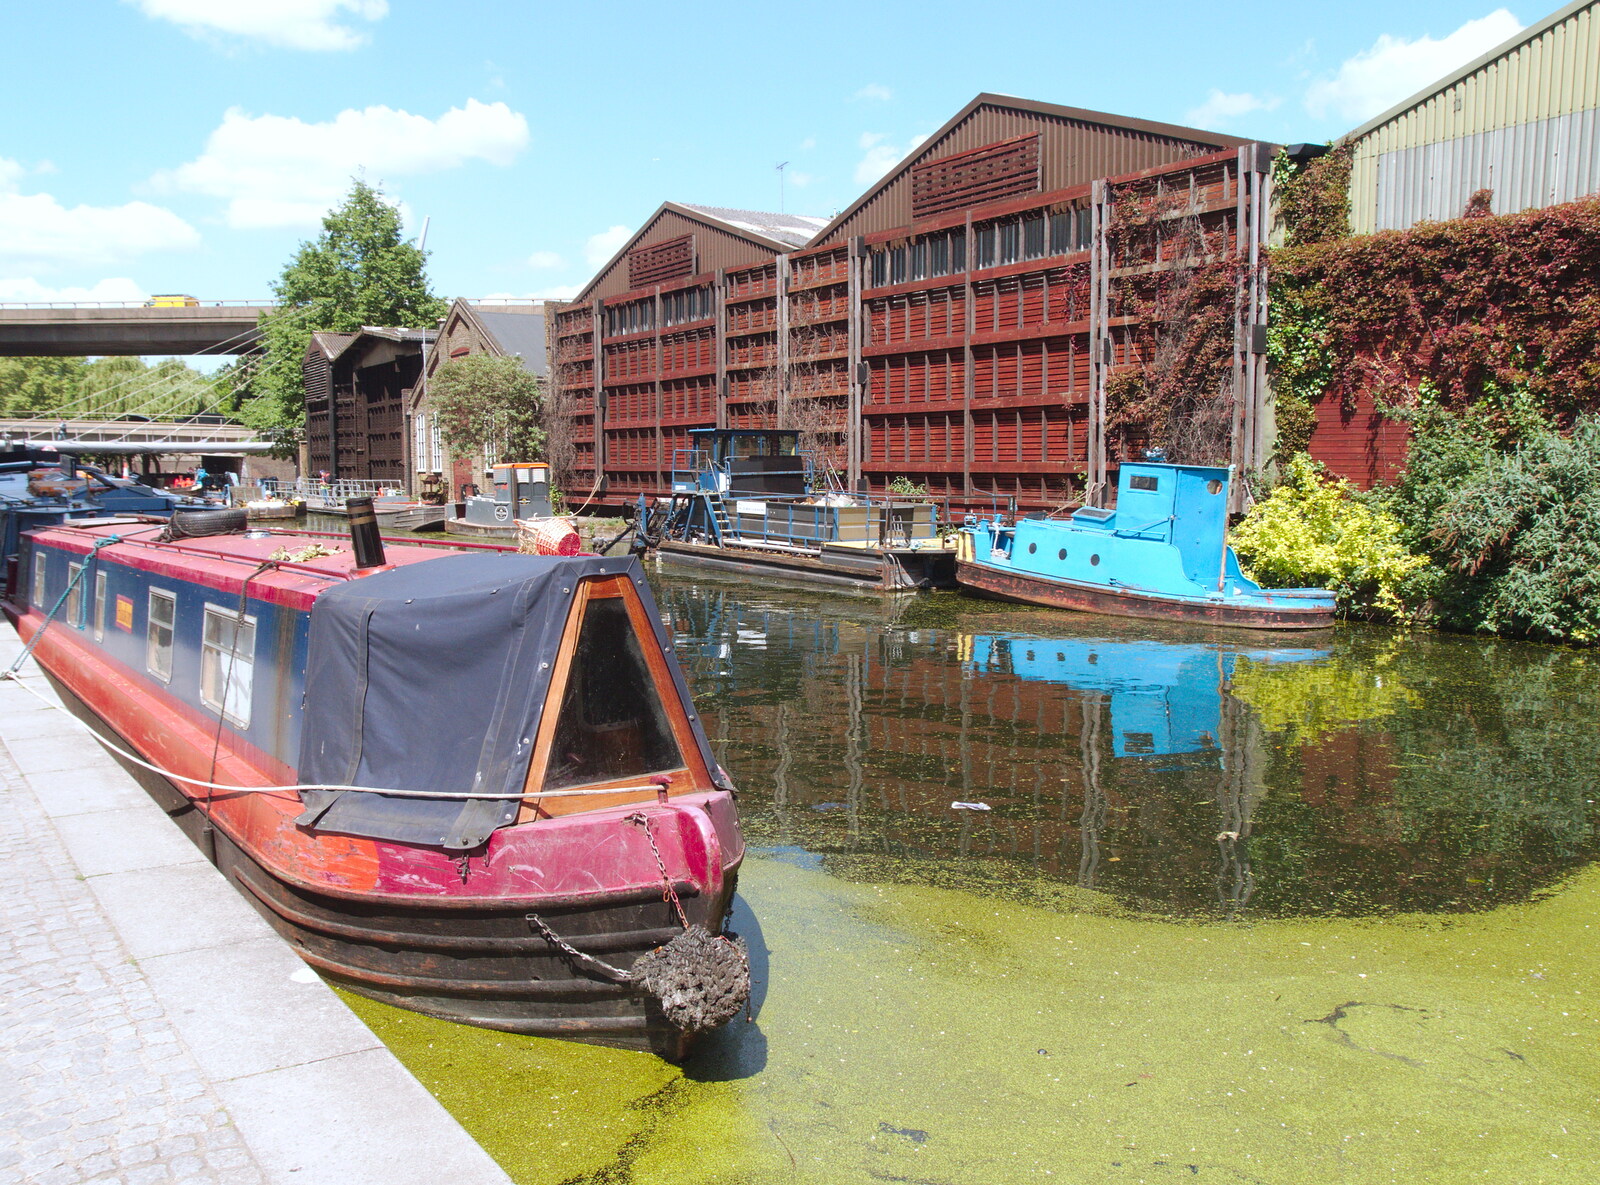 The BSCC at Pulham Market and Hopton, and Lunch in Paddington - 21st May 2019: Some old warehouses, and green algae on the canal